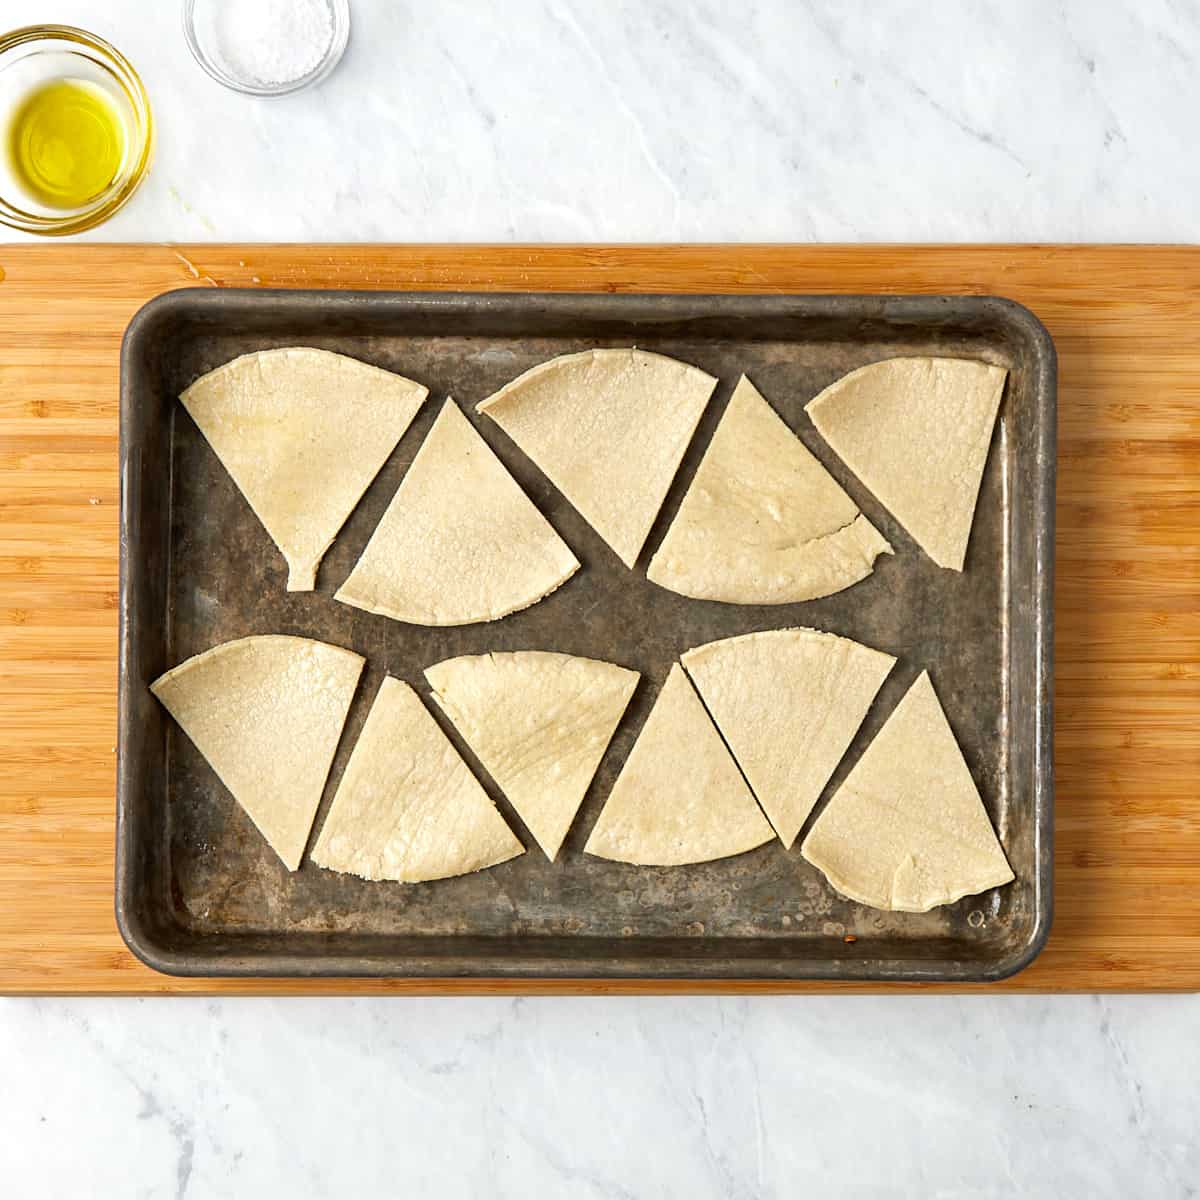 tortilla triangular wedges laid out on a baking sheet before going in the oven.